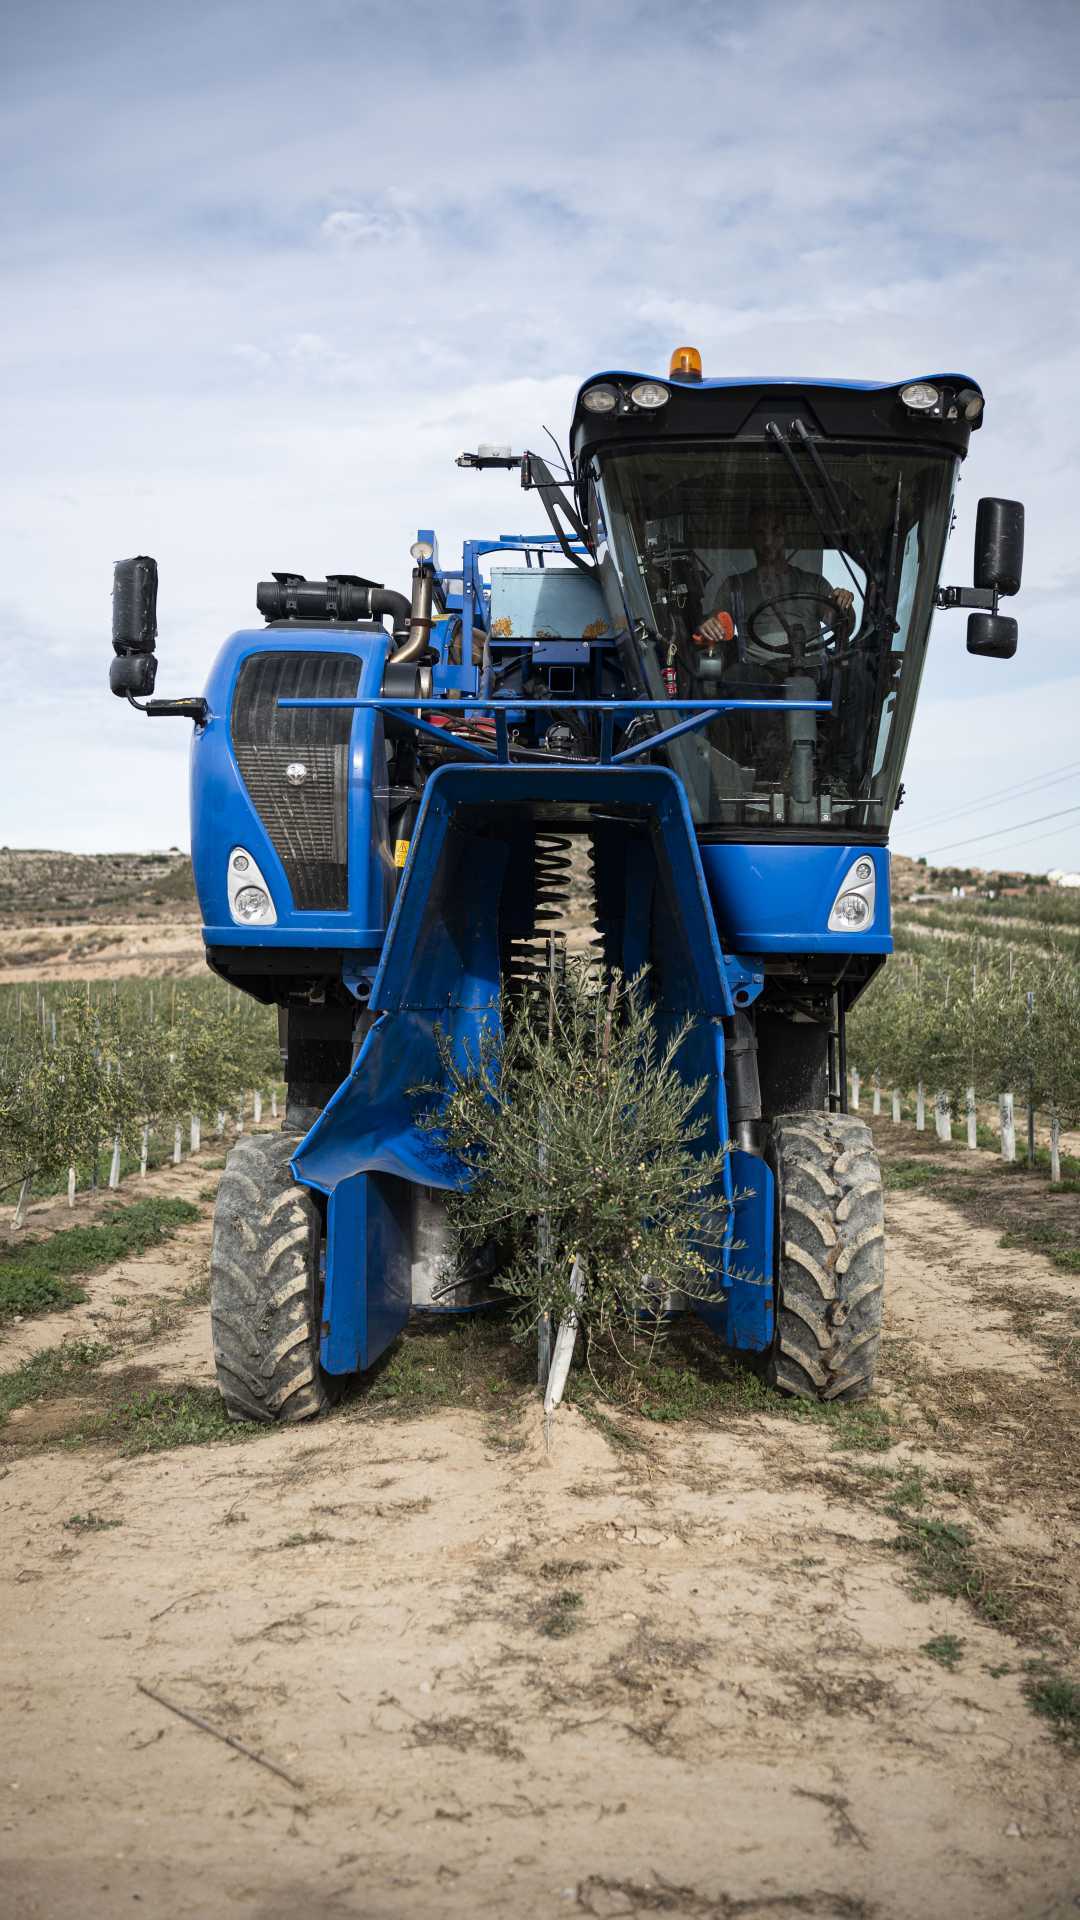 Modern harvesters can gather four tonnes of olives per hectare at five cents per kilo